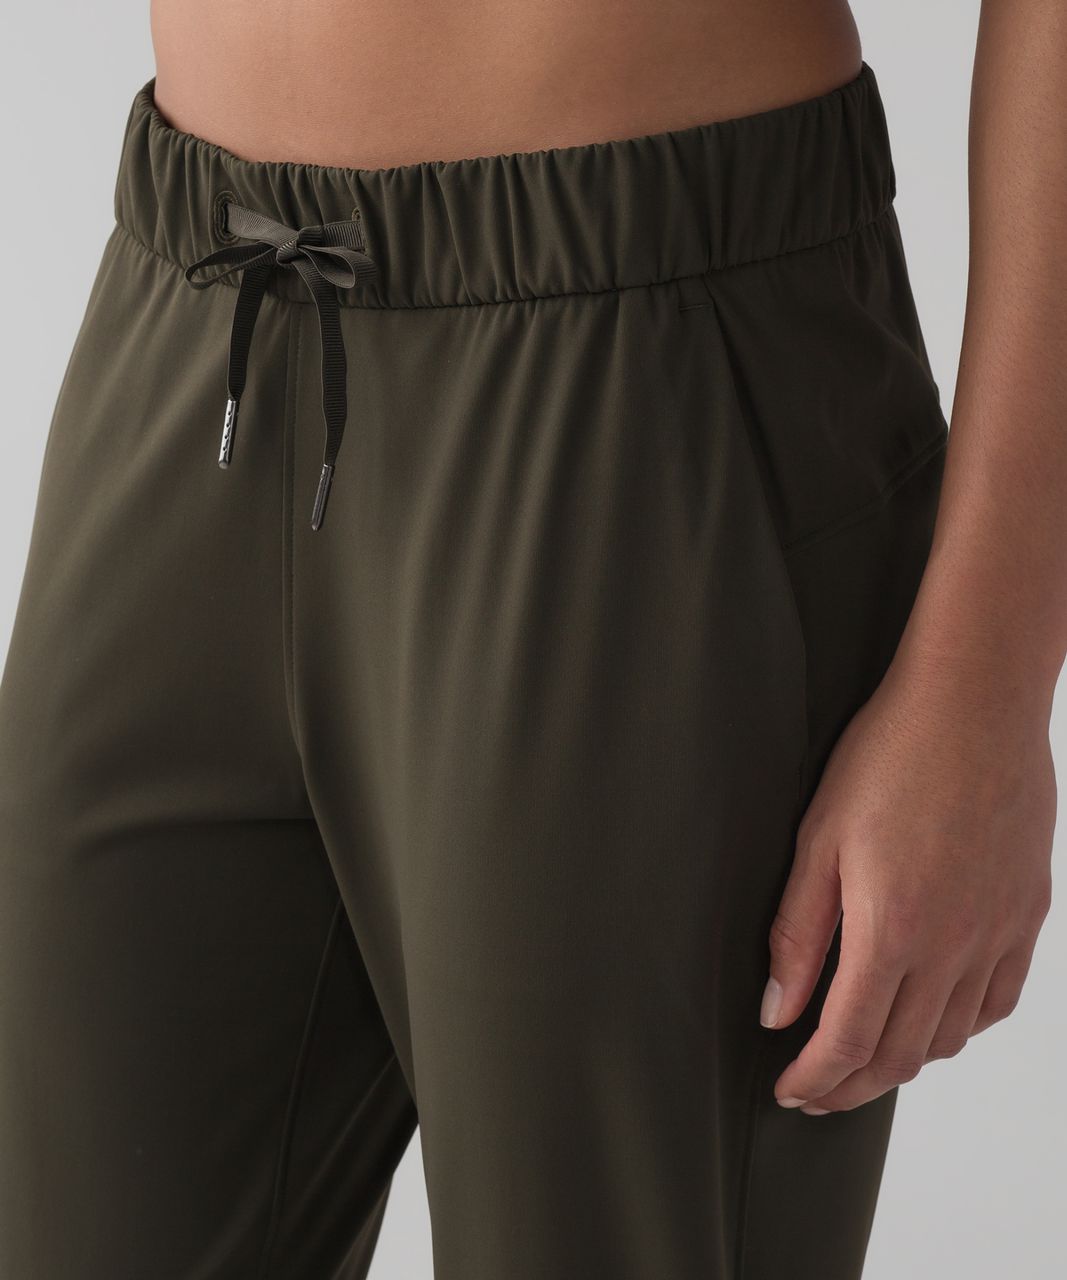 Lululemon On The Fly Pant *28" - Dark Olive (First Release)